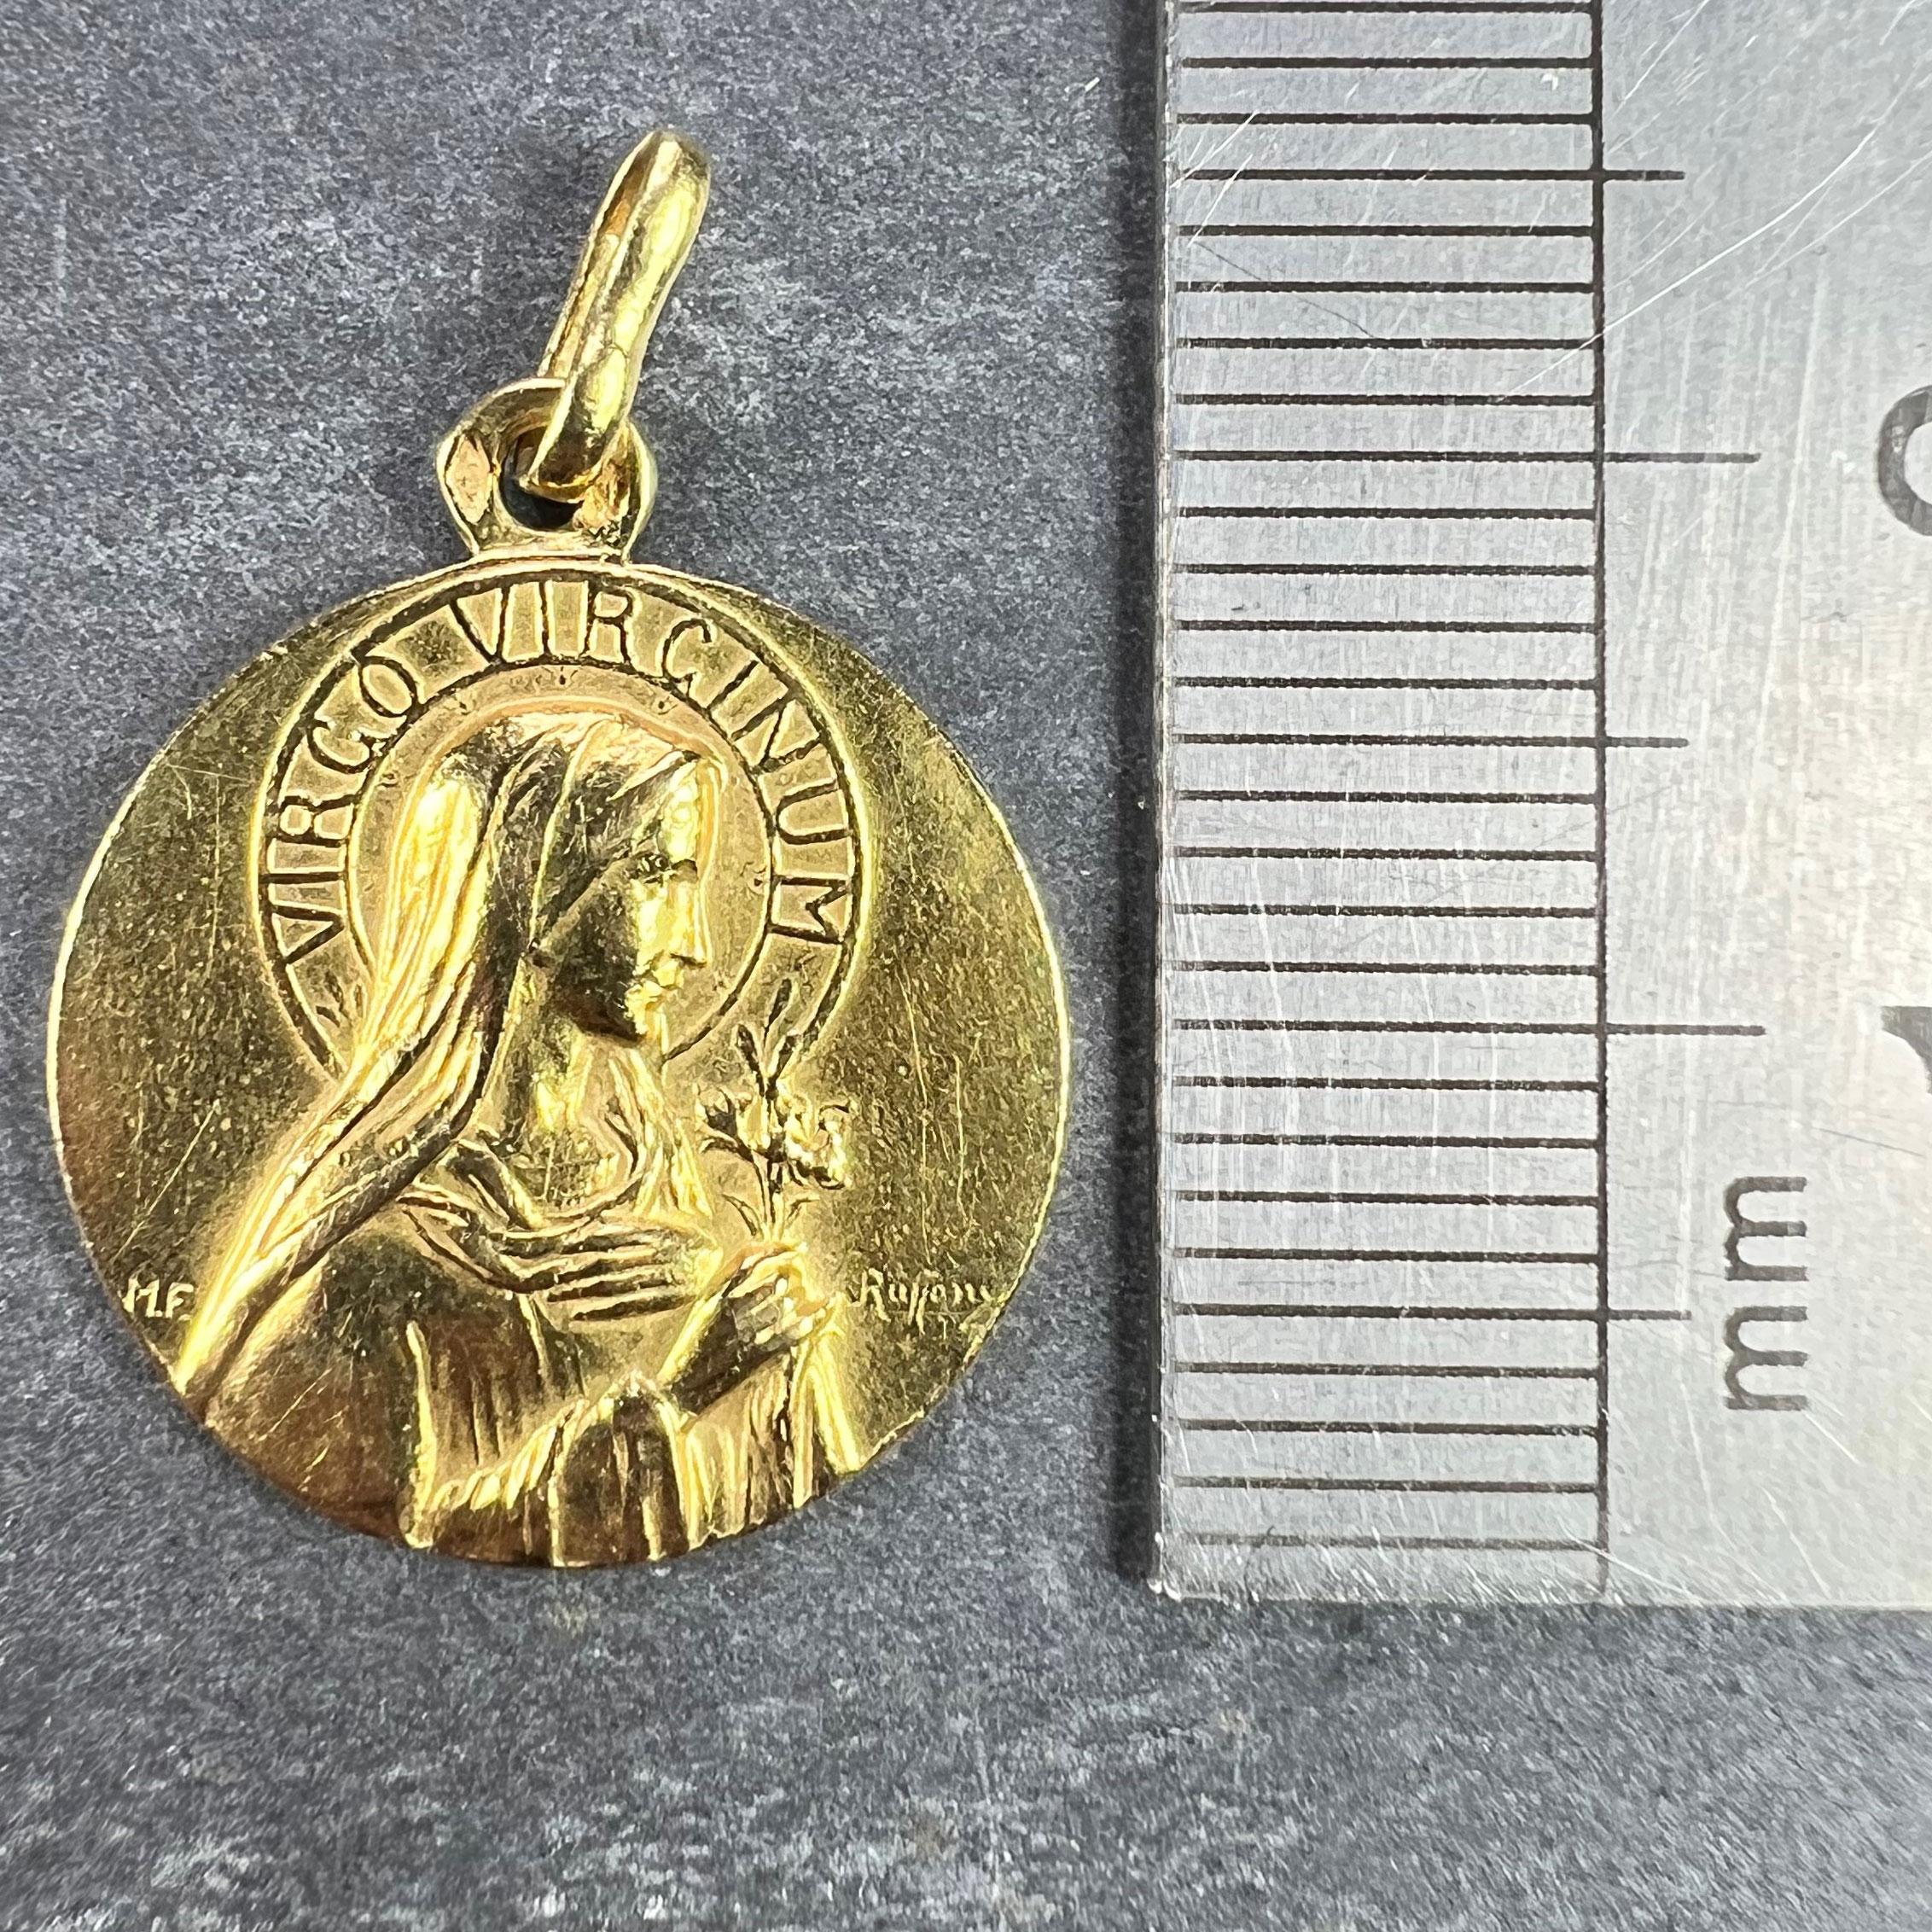 French Ruffony Virgin Mary Virgo Virginum 18K Yellow Gold Medal Pendant For Sale 6